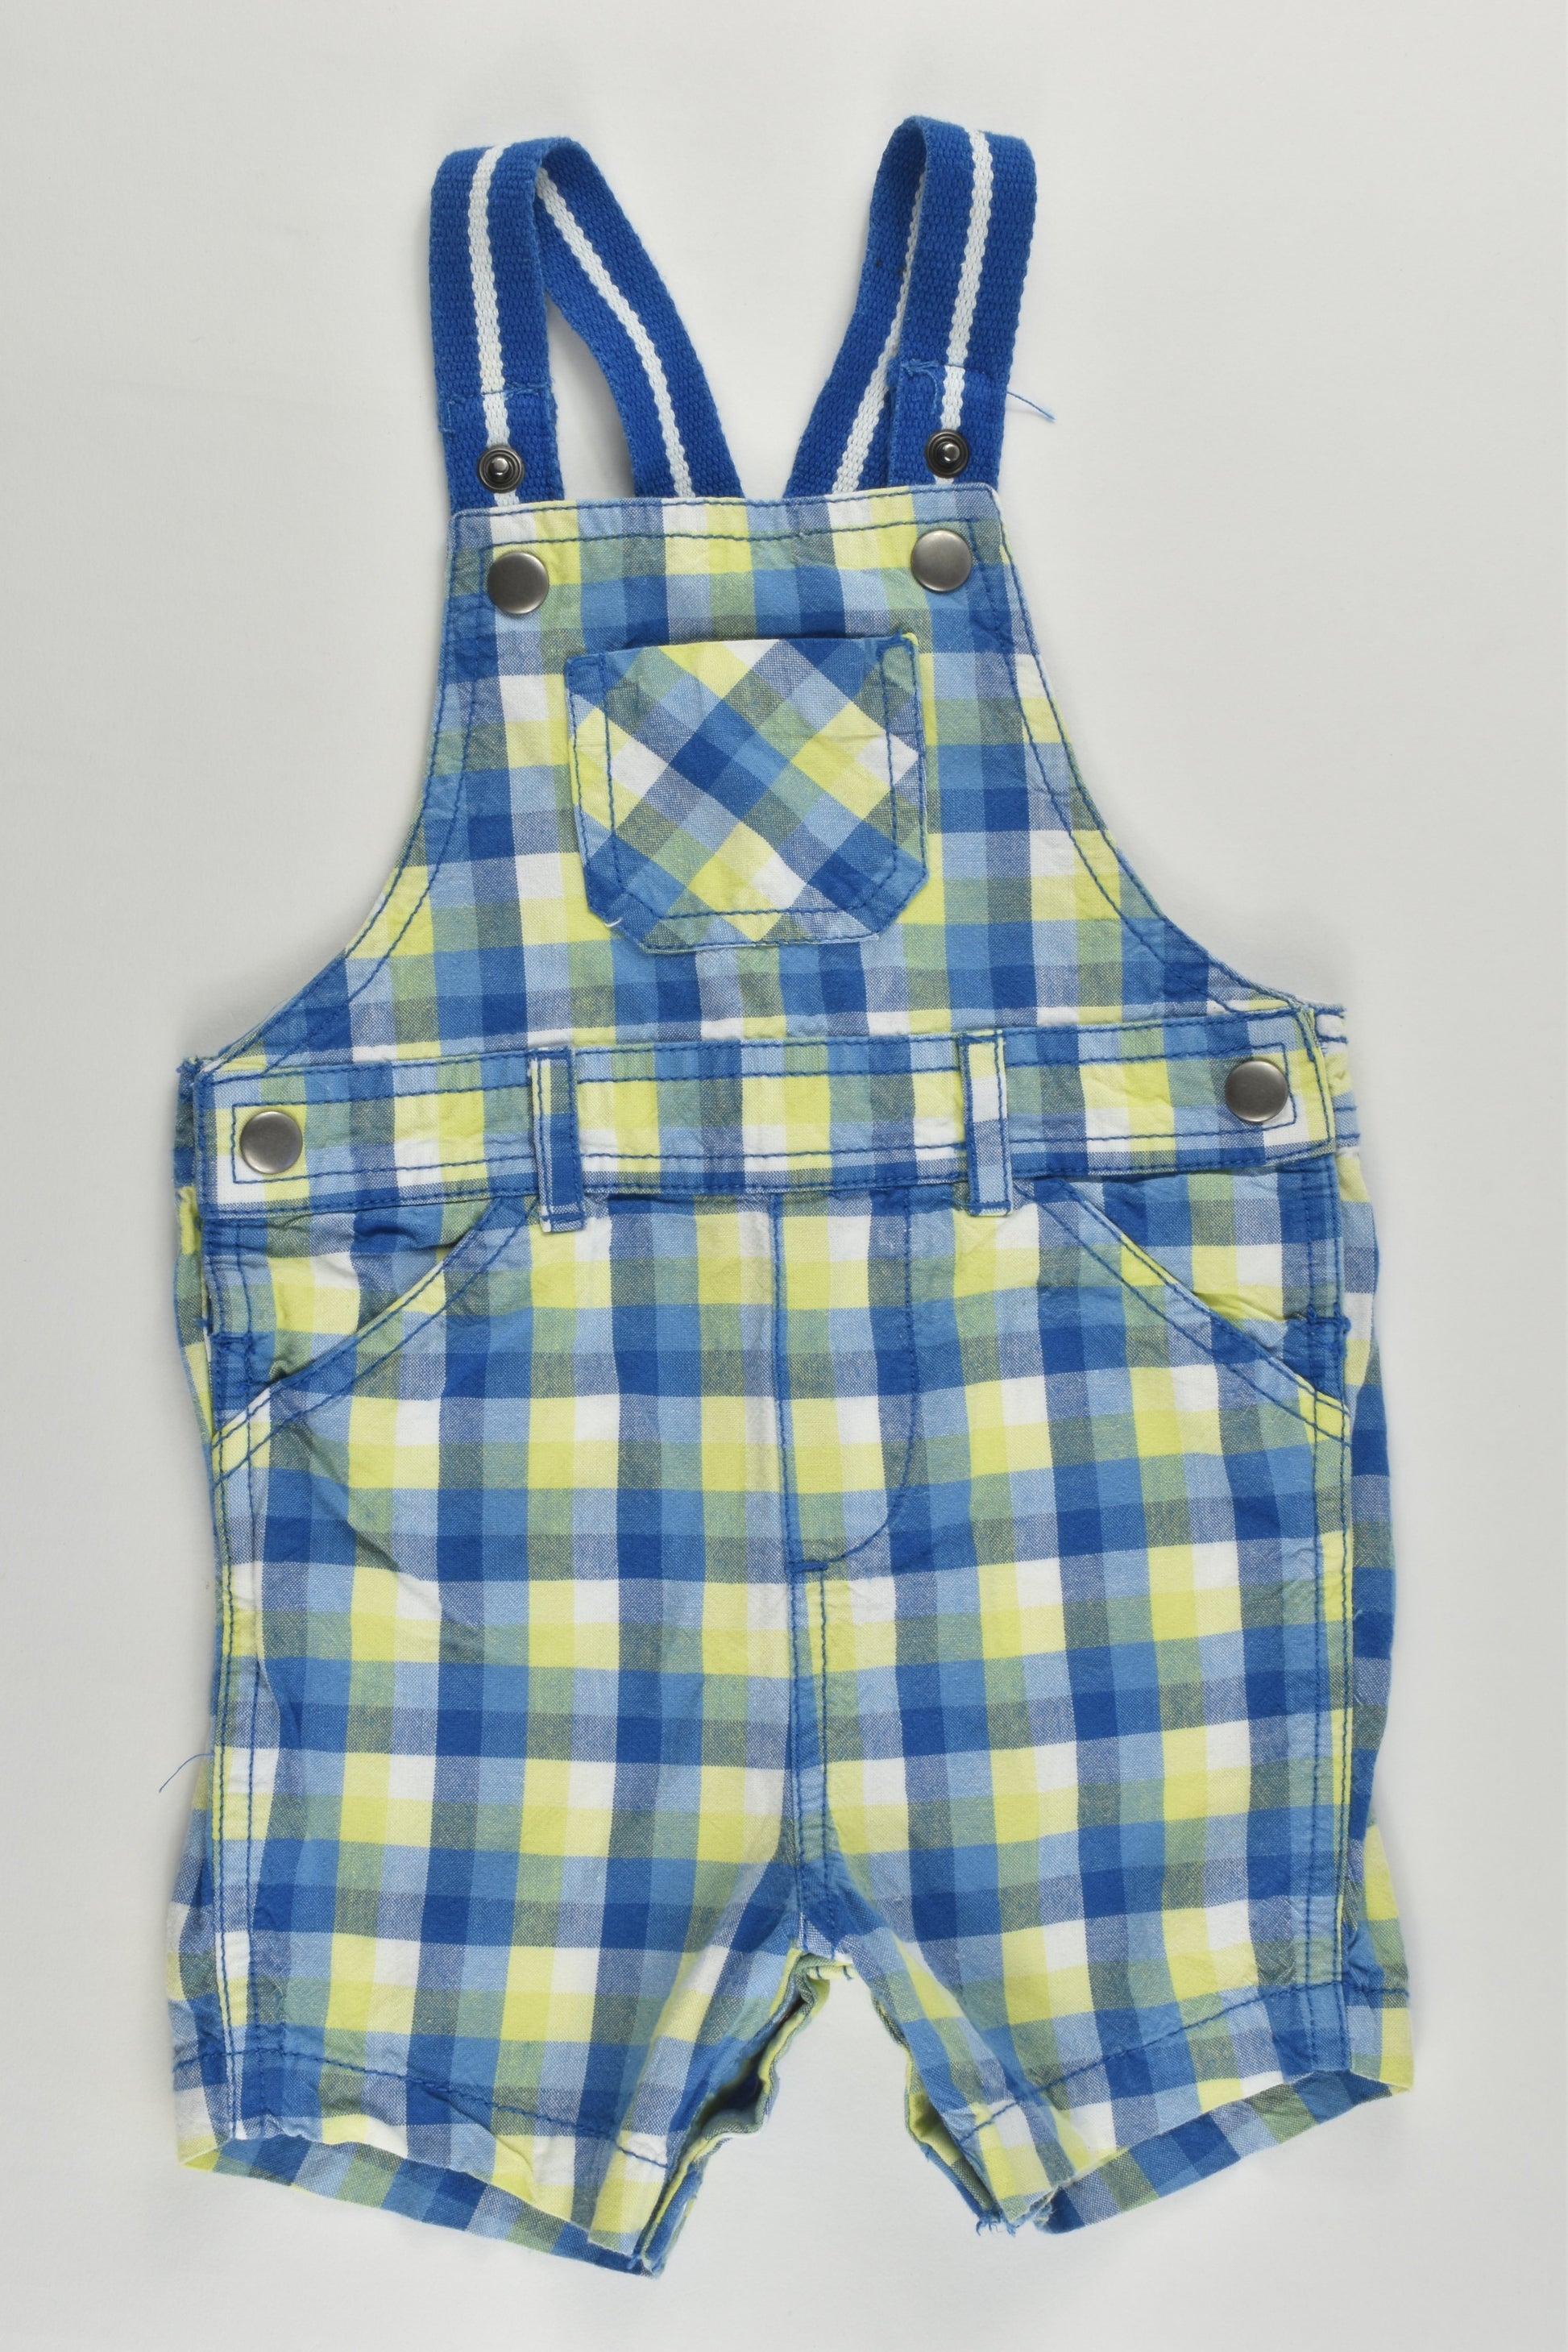 Mini Club (UK) Size 0 (6-9 months) Checked Short Overalls